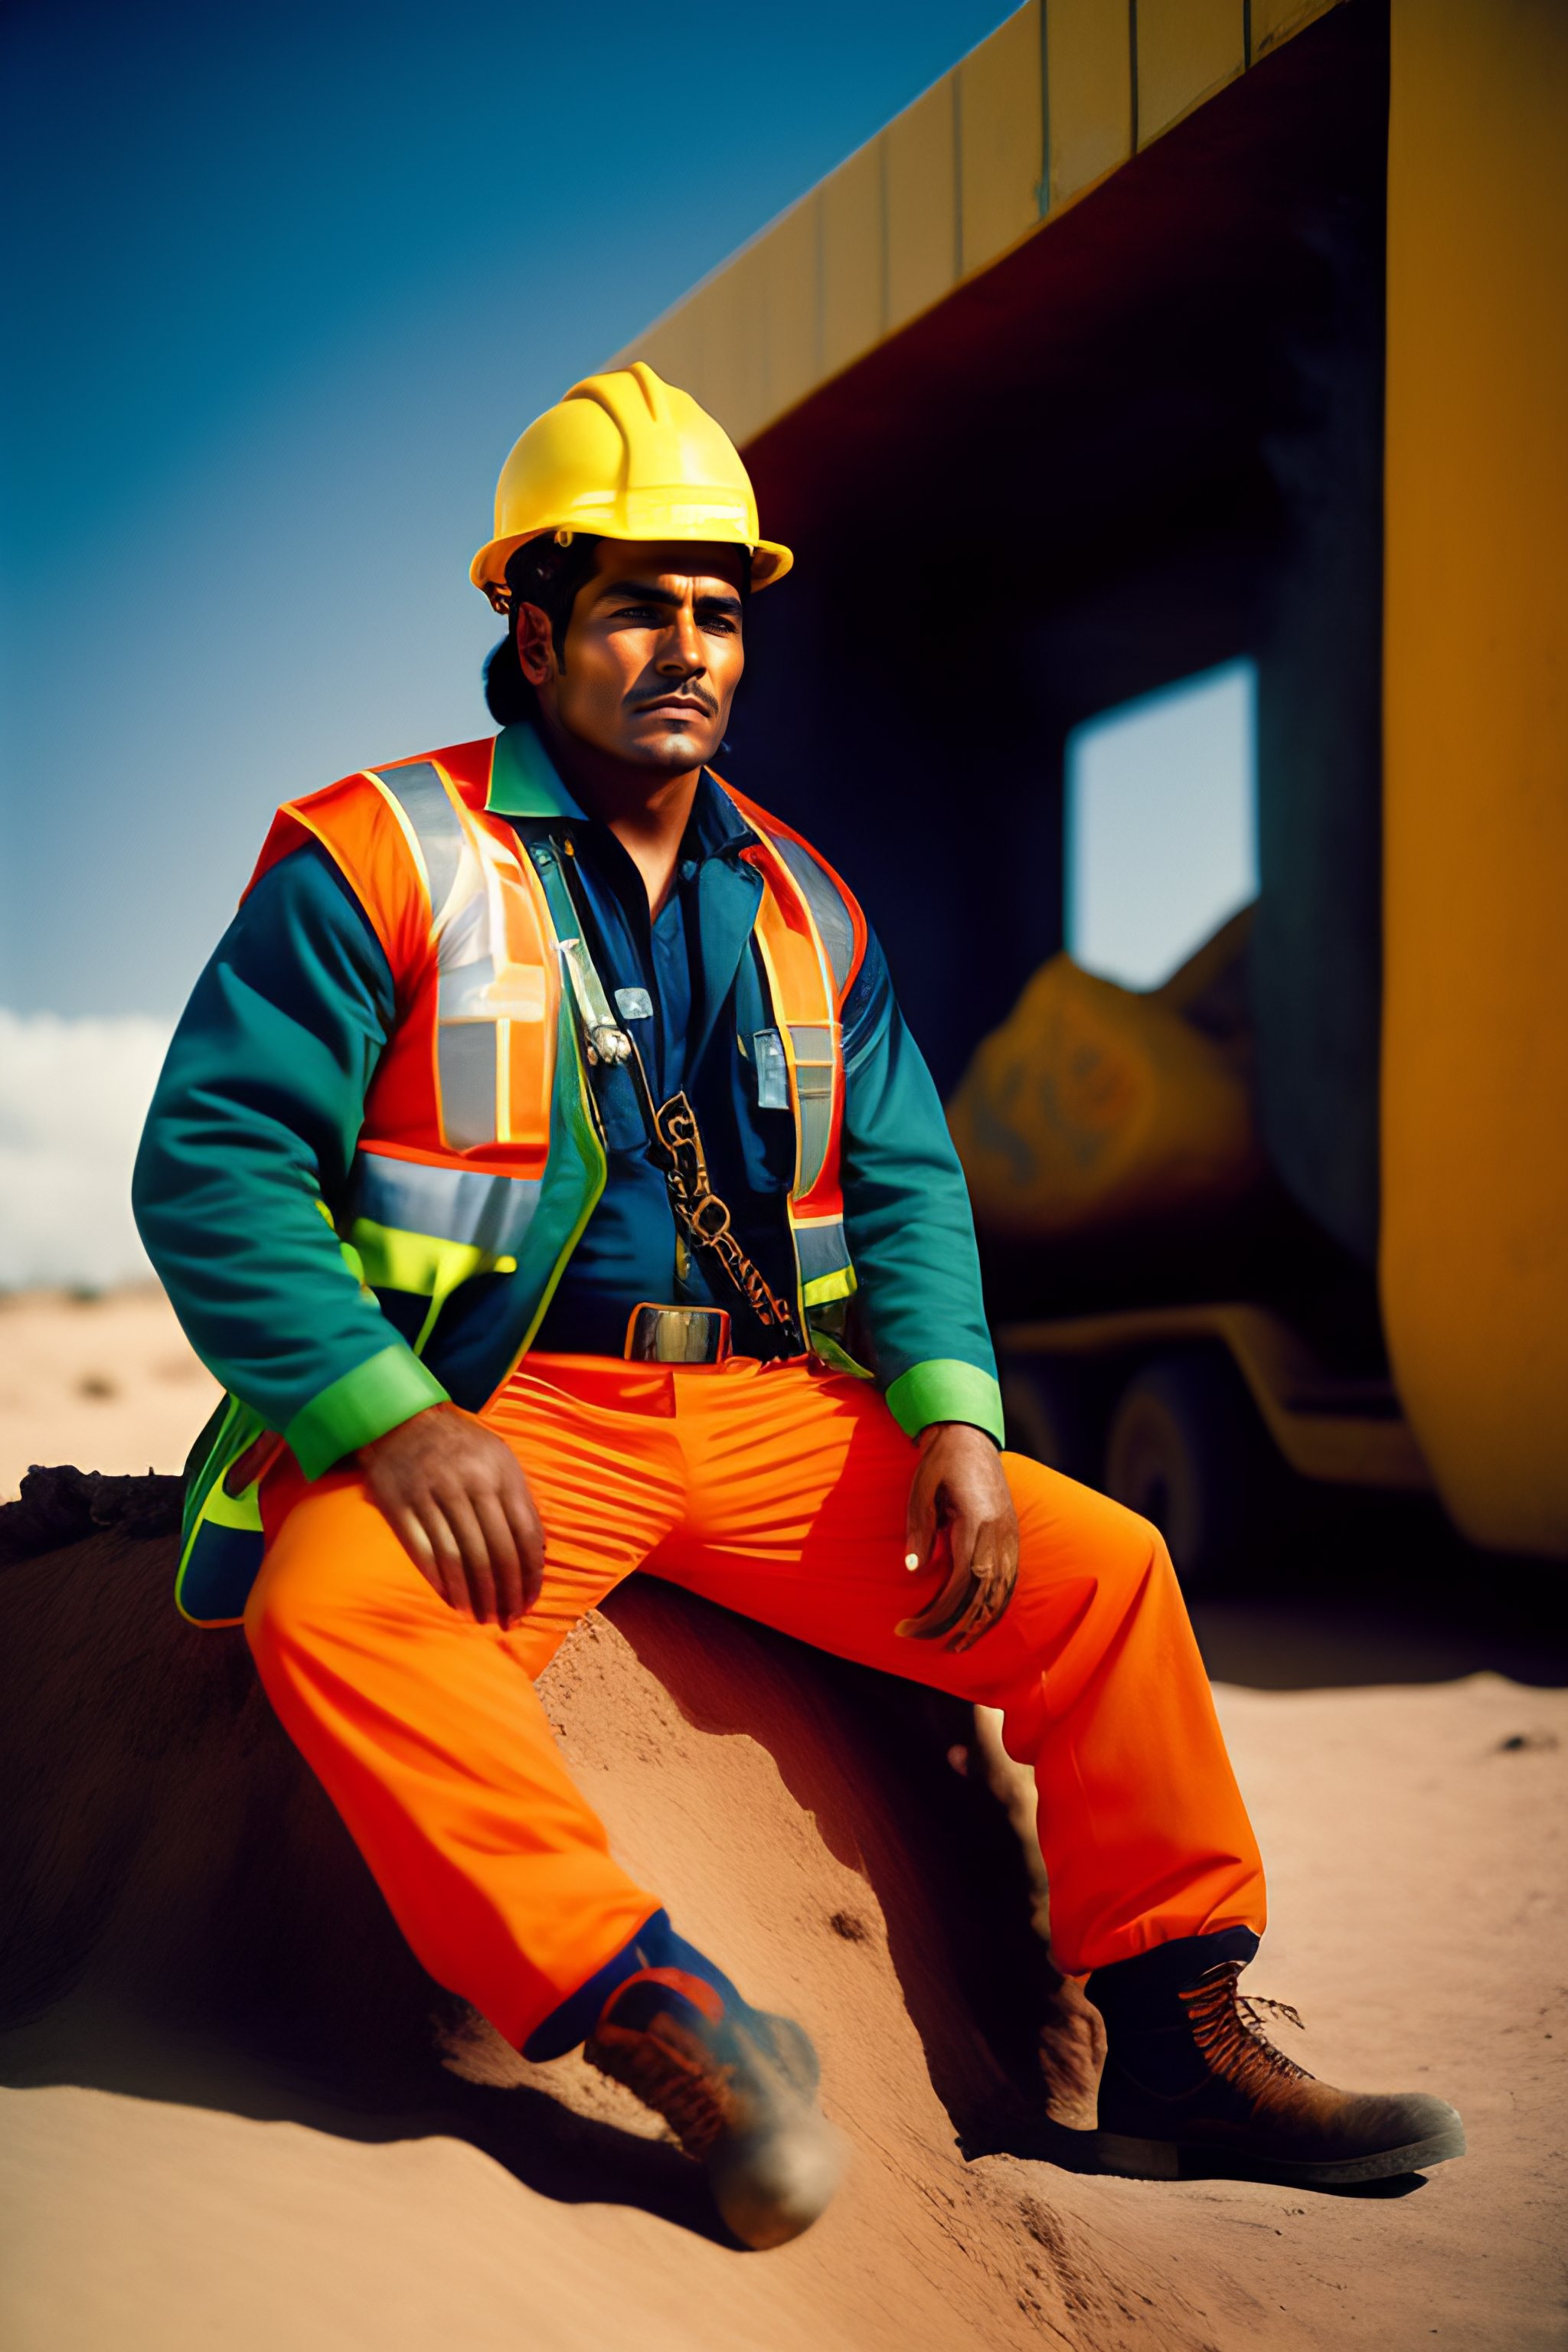 Lexica - Portrait of mexican construction workers on job site in ((gucci  suits and neon construction vests)) EPIC photoshoot by Annie Leibovitz.  LOUN...